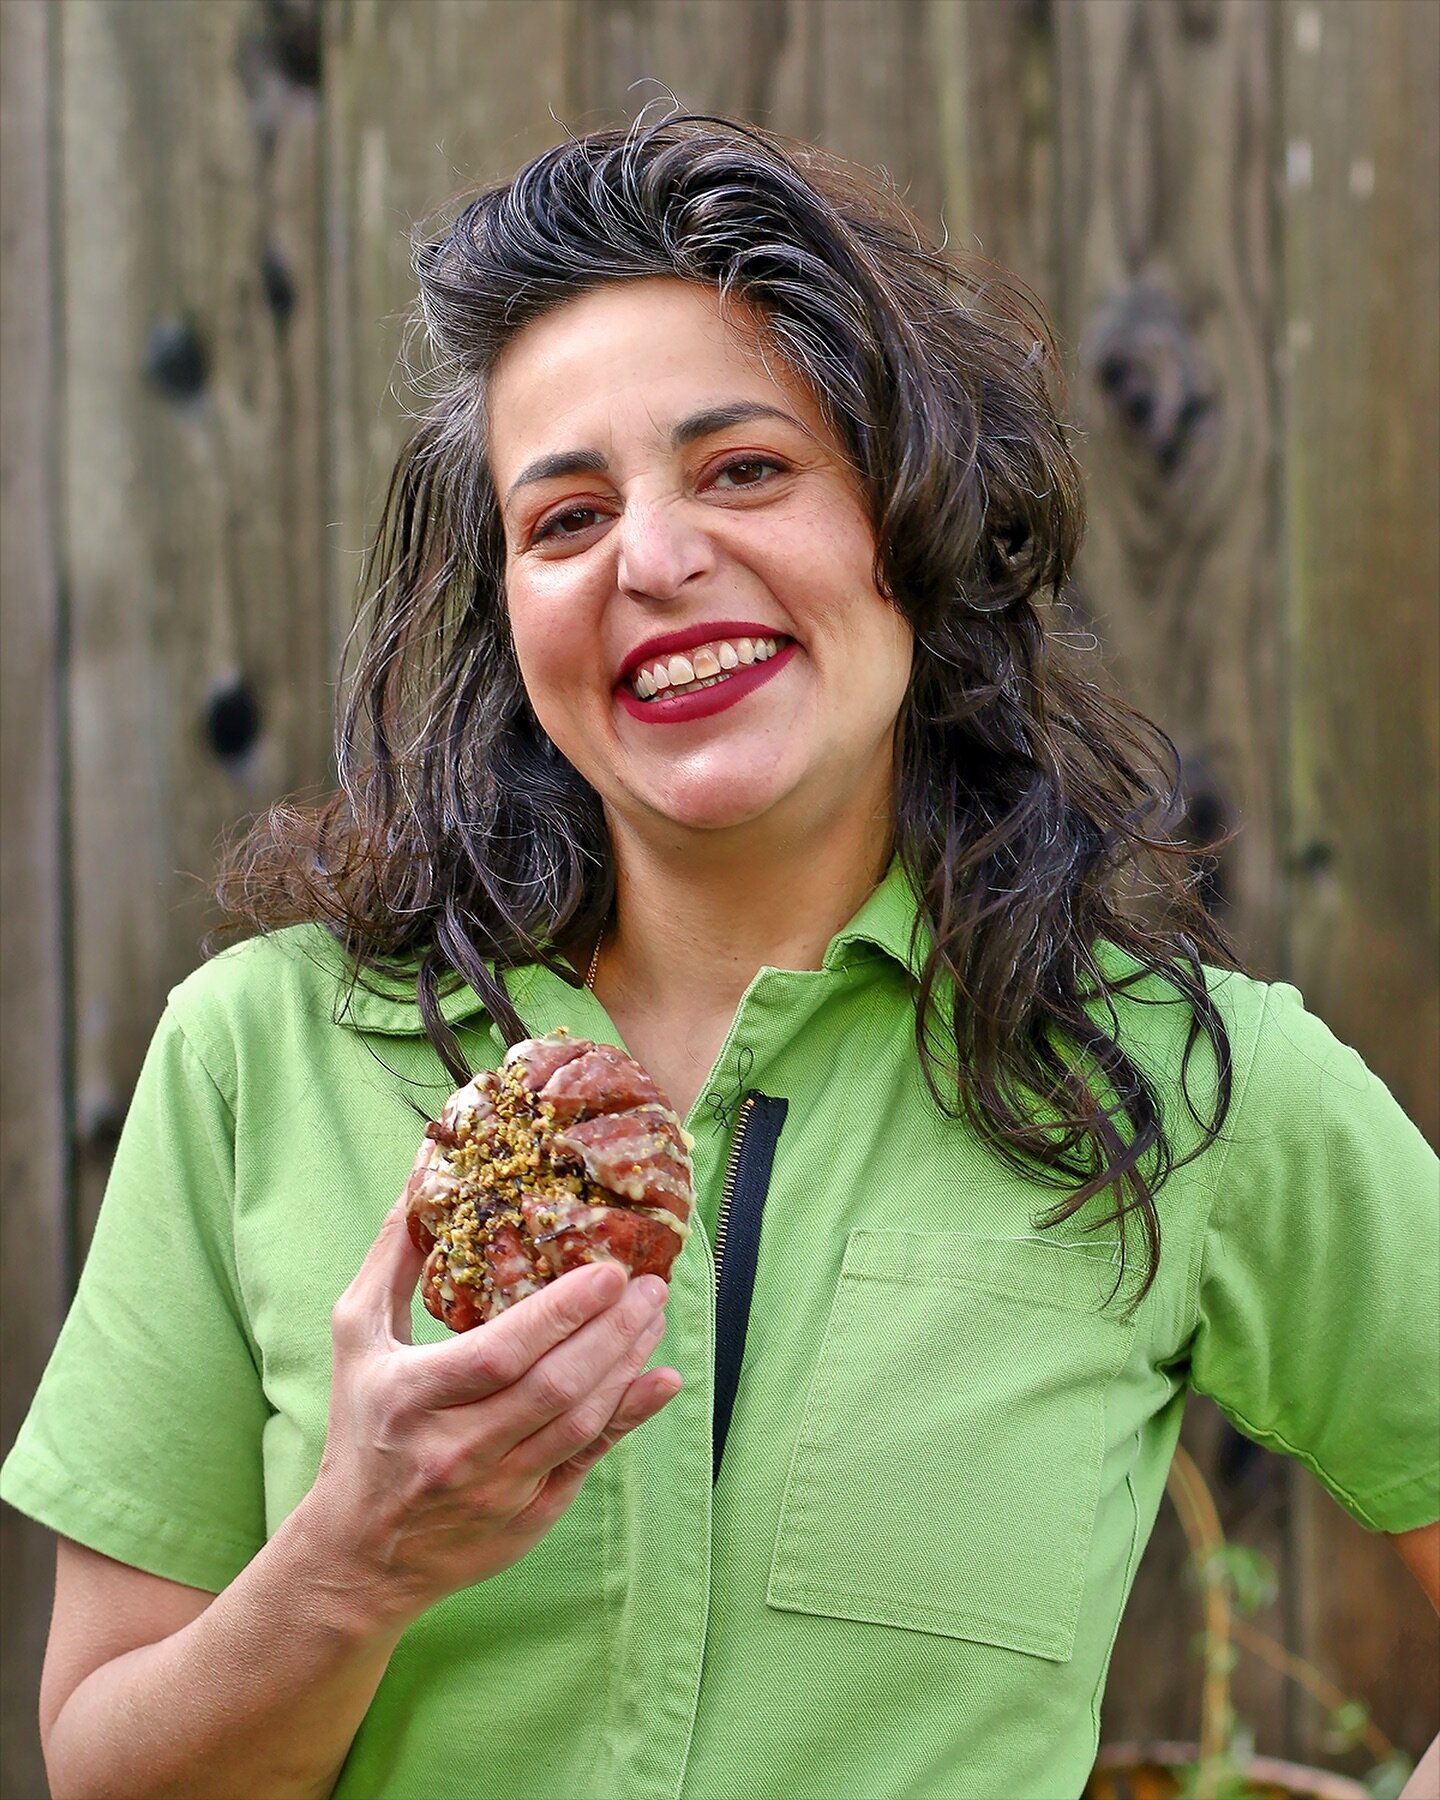 A couple of years ago when we first offered our Persian Love Fritter, made with saffron &amp; pistachio dough, drizzled with a cardamom-rose water glaze, and sprinkled with pistachios &amp; hibiscus petals, our long time regular, Roxy, fell in love. 